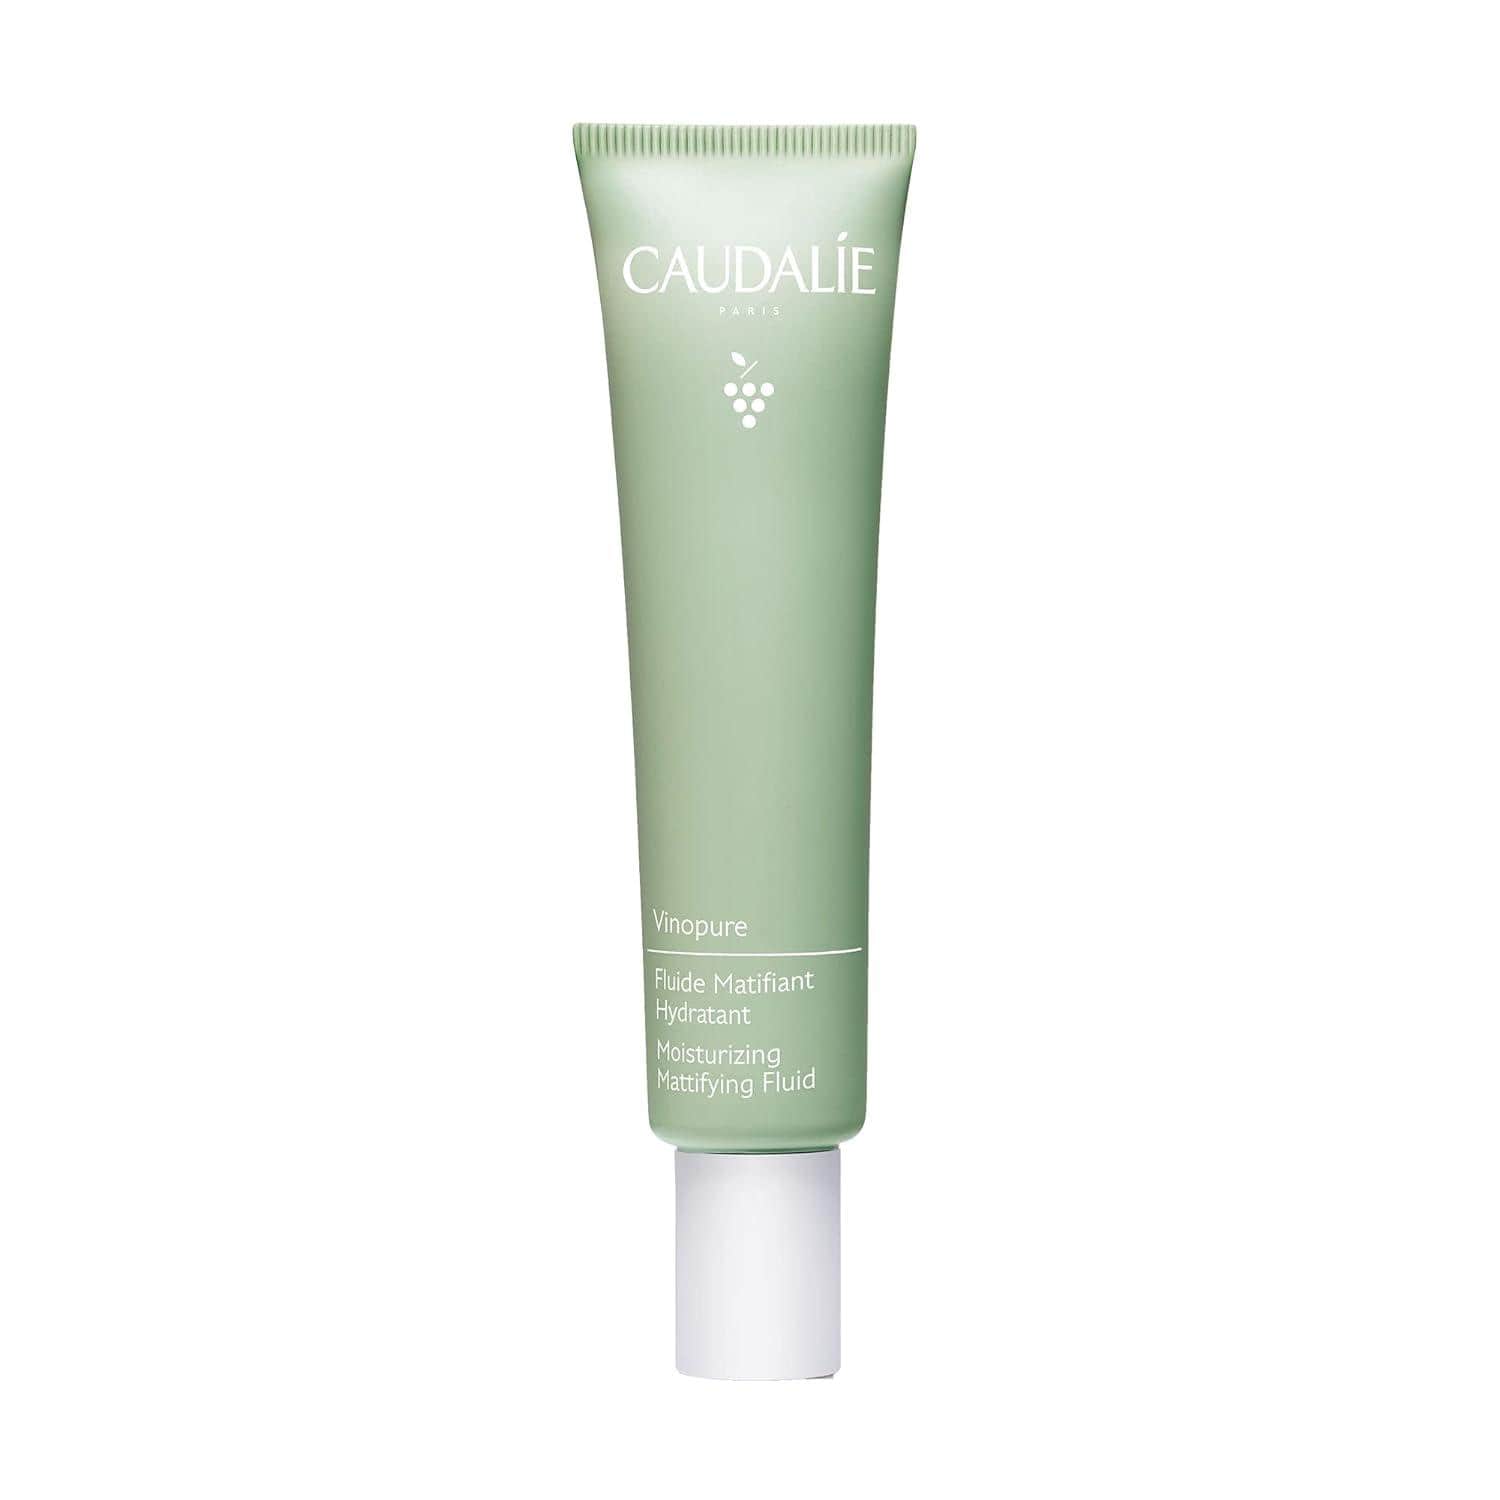 Acne-Prone Skin, the Caudalie Vinopure Moisturizing Mattifying Fluid is a game-changer, offering an oil-absorbing, non-comedogenic, and vegan formula with silica powder, java tea extract, and olive squalane.